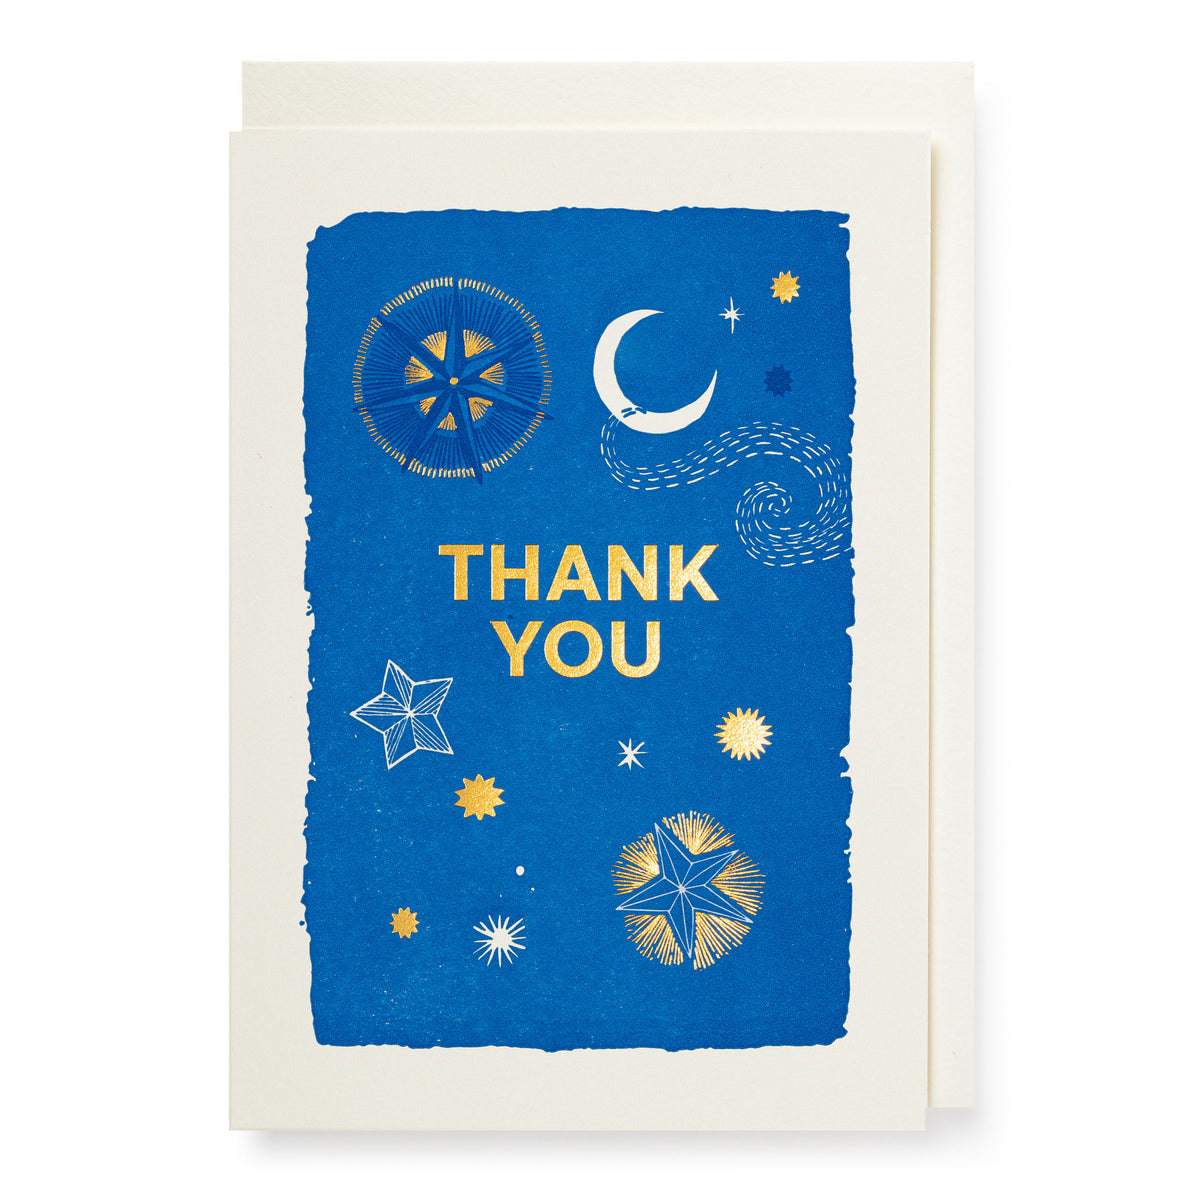 Thank You - letterpress printed greeting card